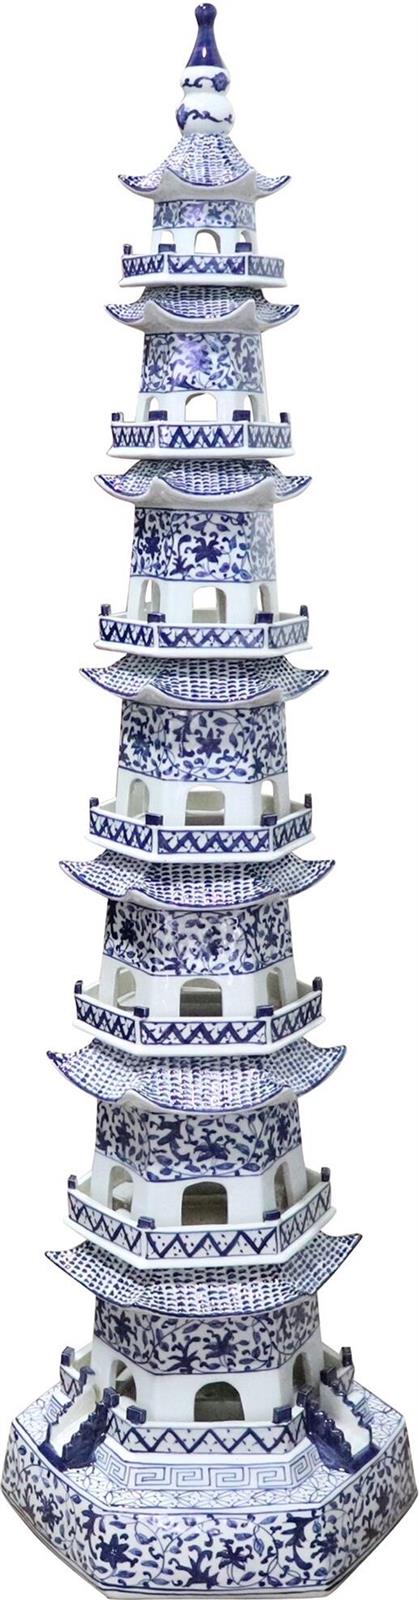 Pagoda Sculpture Twisted Vine Abstract 7-Tier Blue White Ceramic Handmade-Image 1